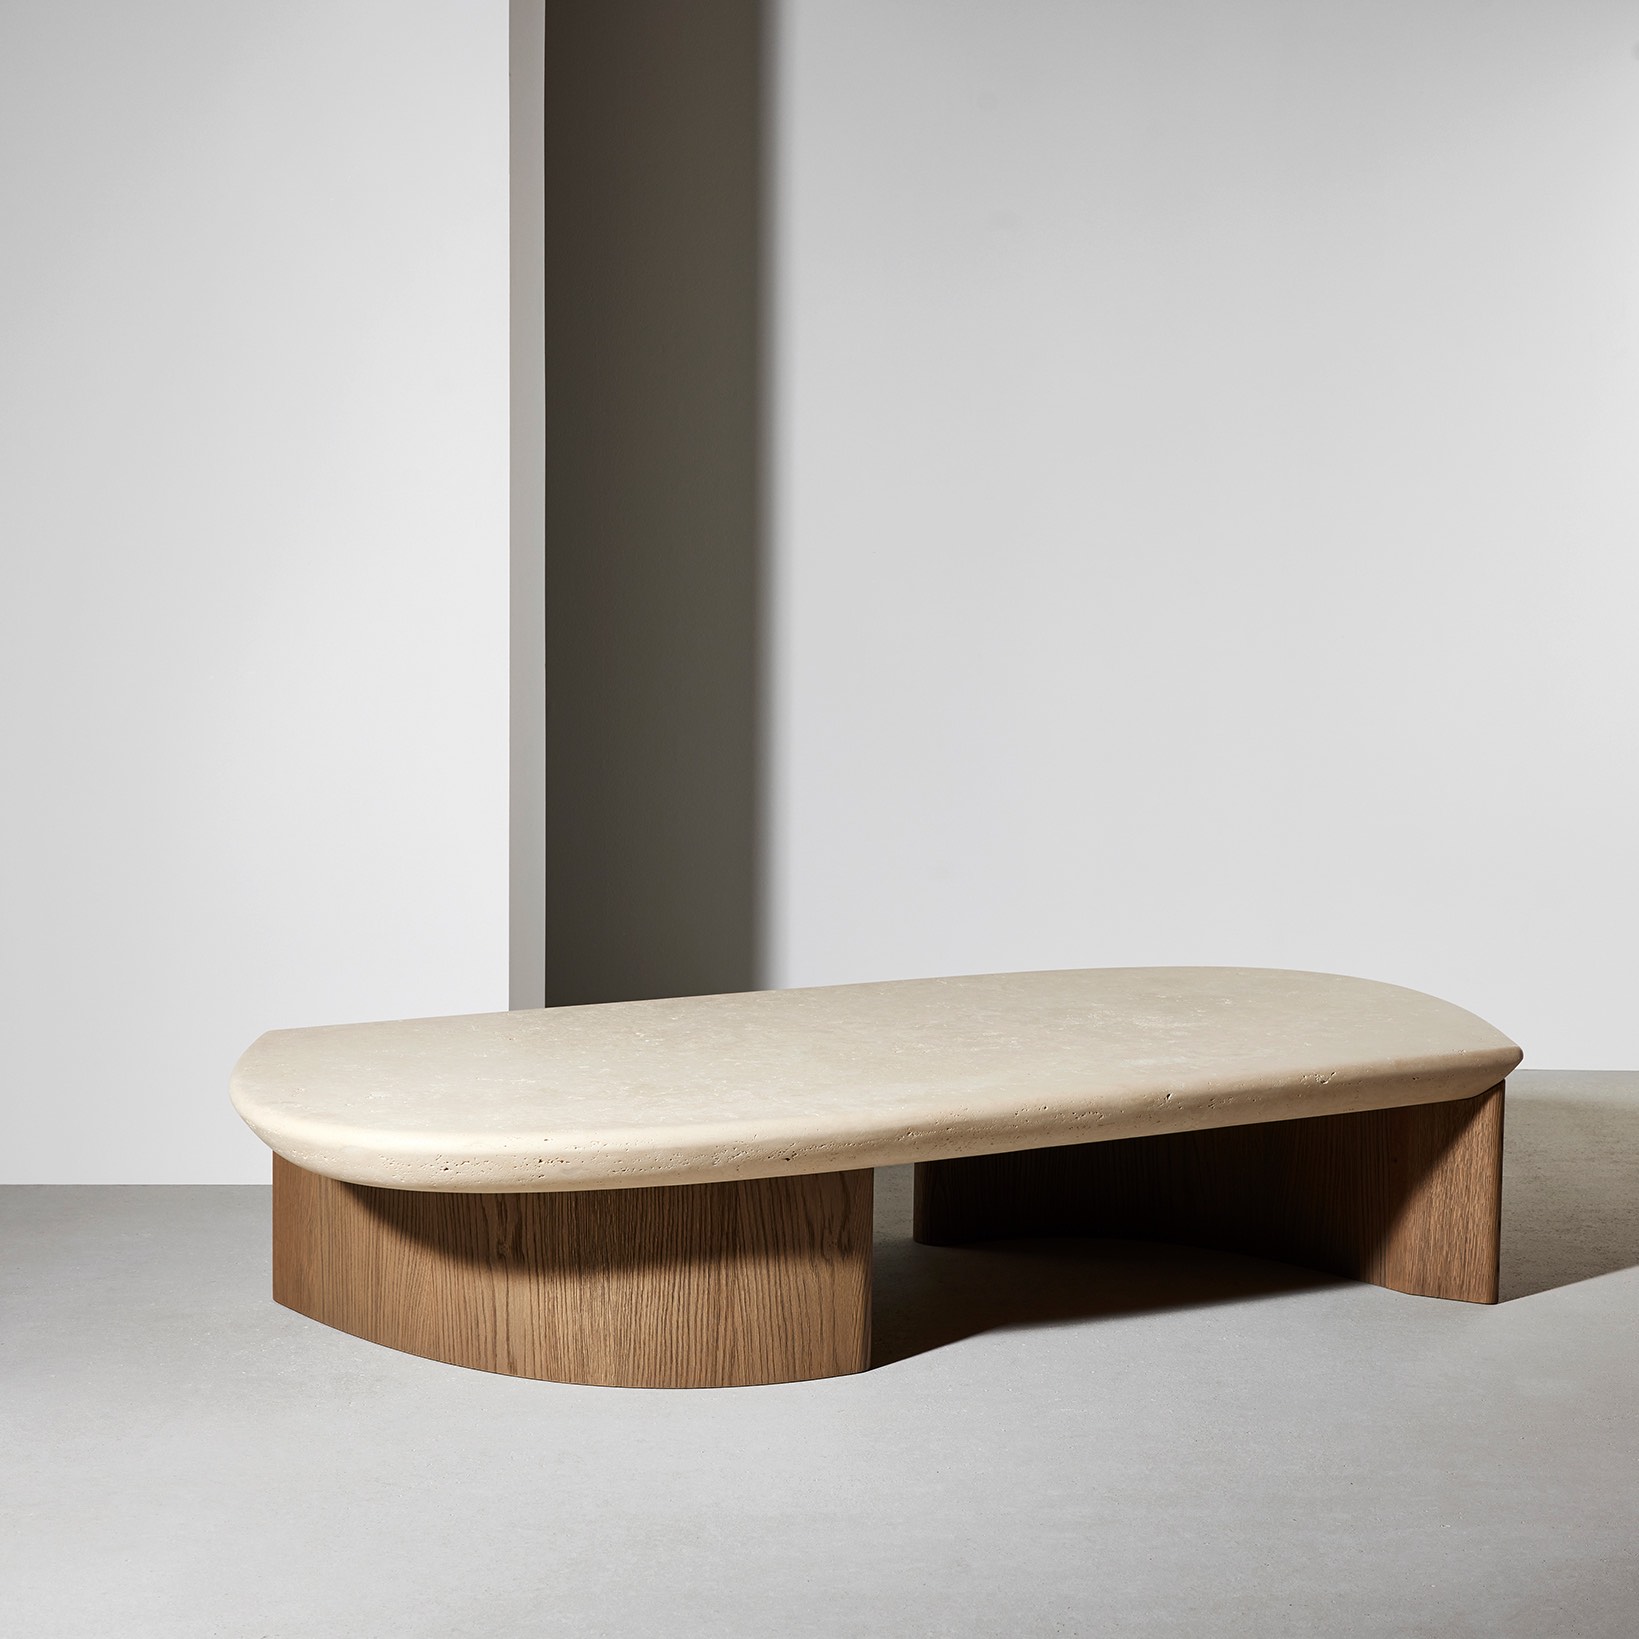 LADY-R-COFFEE-TABLE_LUCA-ERBA-COLLECTION_PARTICULIERELADY-R-COFFEE-TABLE_LUCA-ERBA-COLLECTION_PARTICULIERE